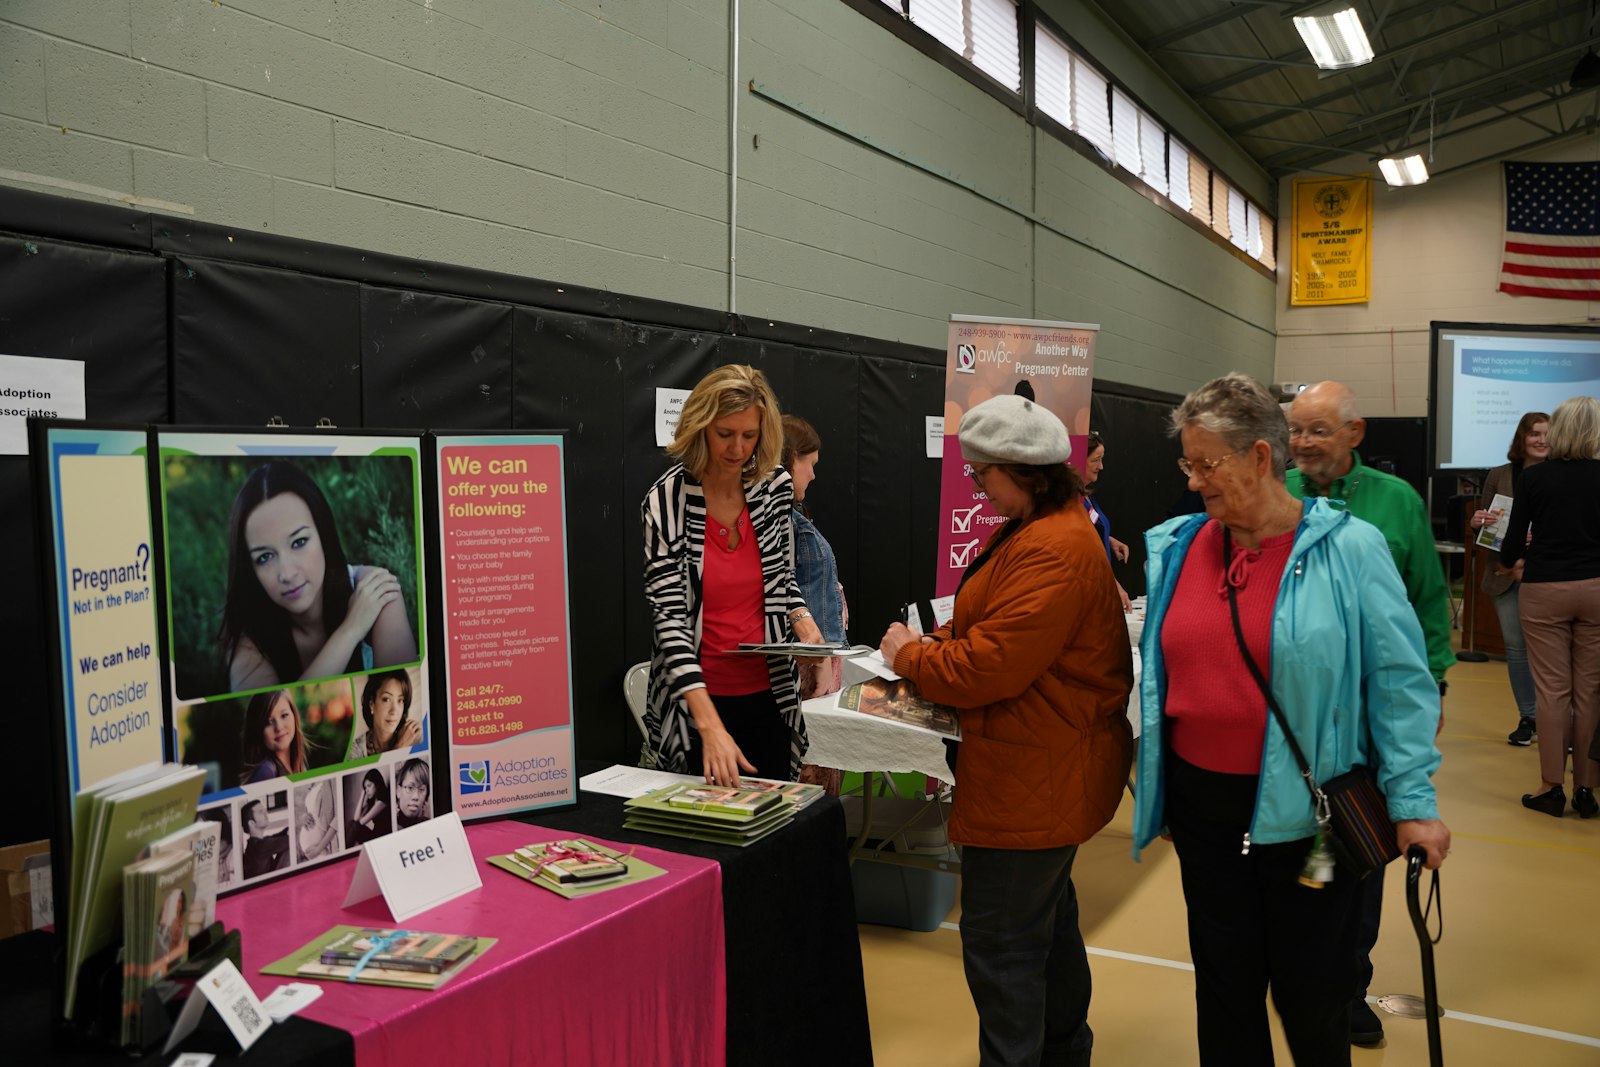 Pro-life ministries across southeast Michigan had booths set up at the Walking With Moms in Need forum at Holy Family Parish in Novi, explaining the services offered to pregnant moms and mothers of infants and how volunteers can assist in pro-life efforts.